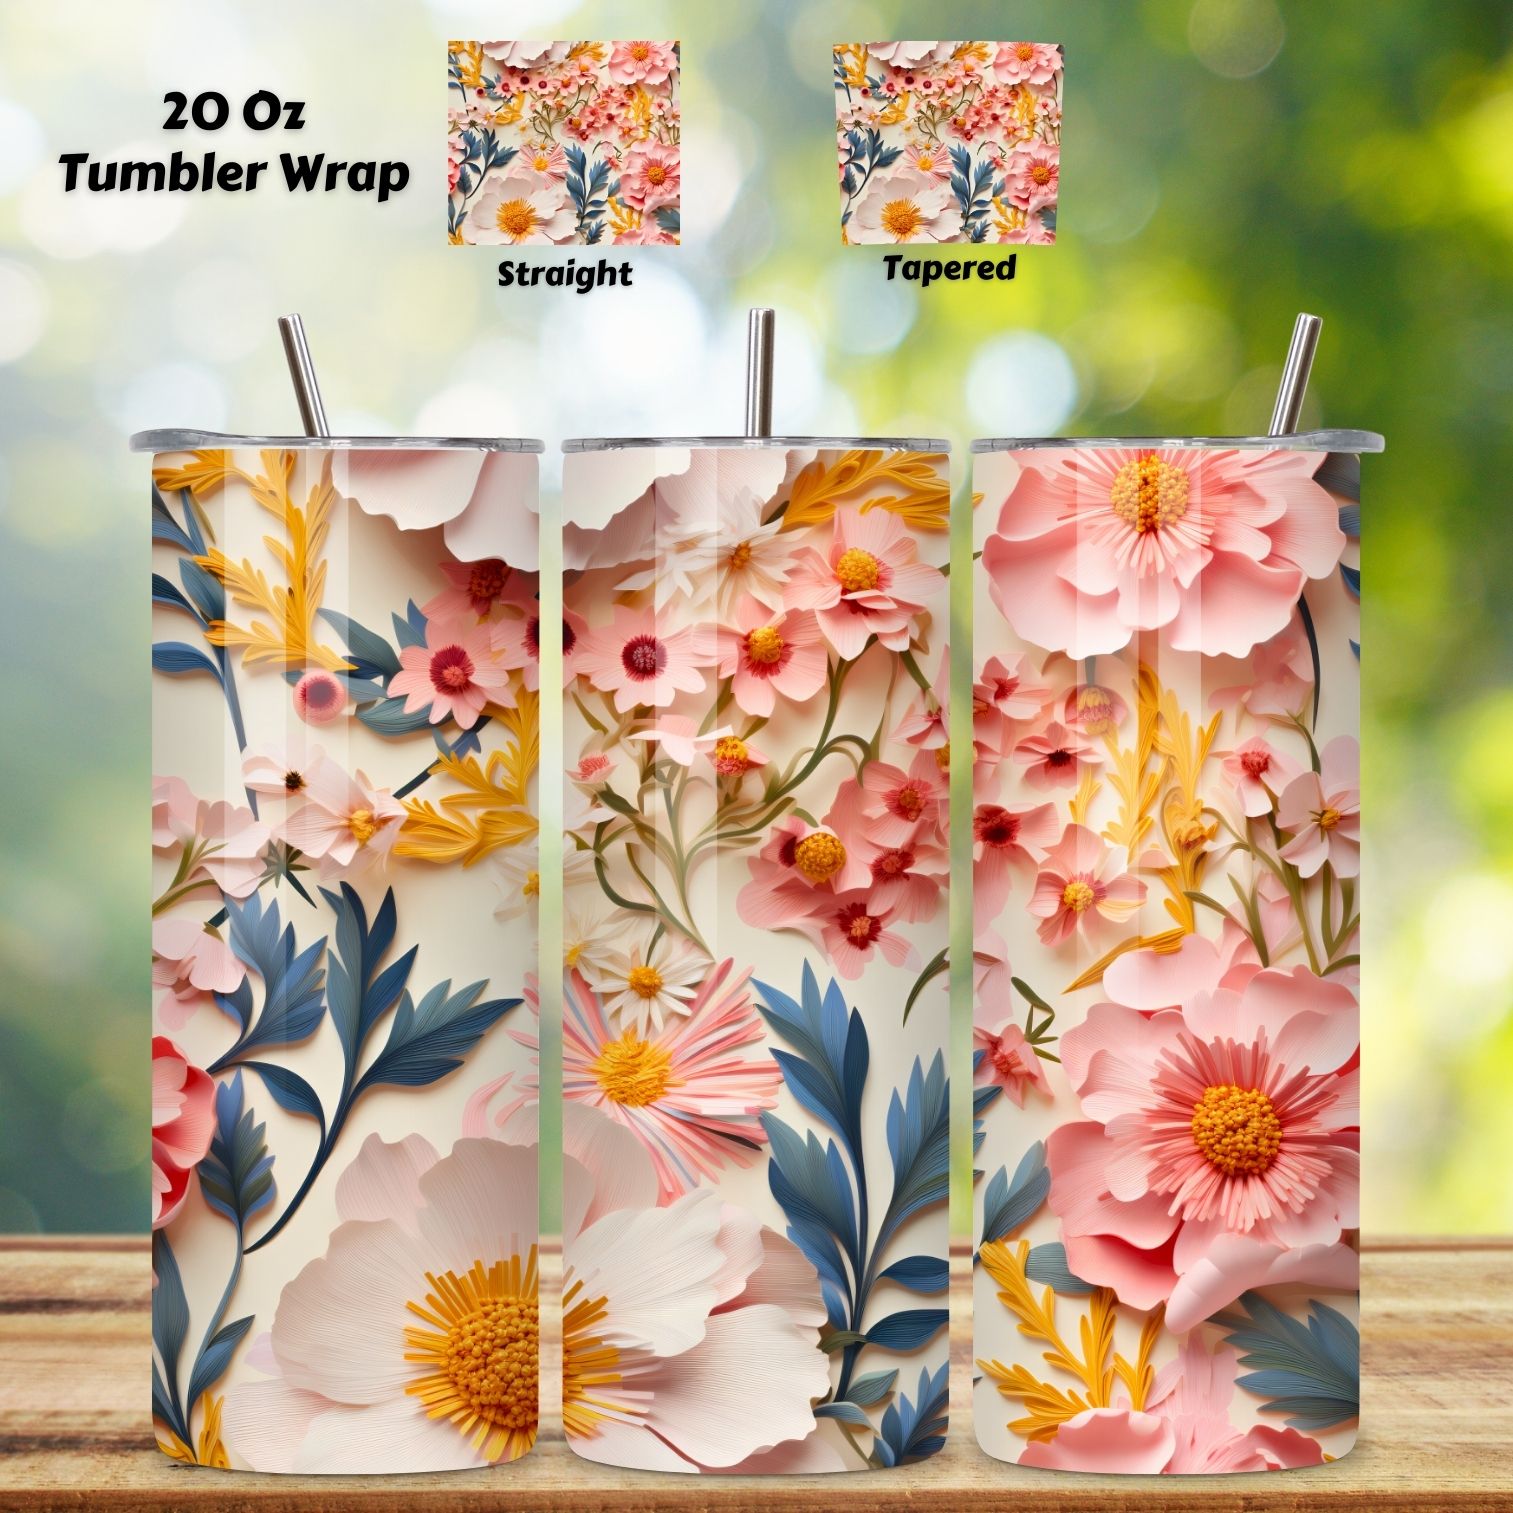 3D Wildflowers in Spring Tumbler Wrap | Seamless Wrap Design, Rainbow vibrant glitter Floral Tumbler Wrap, Sublimation Design, 20 oz Skinny Tumbler, Groovy Flower cover image.